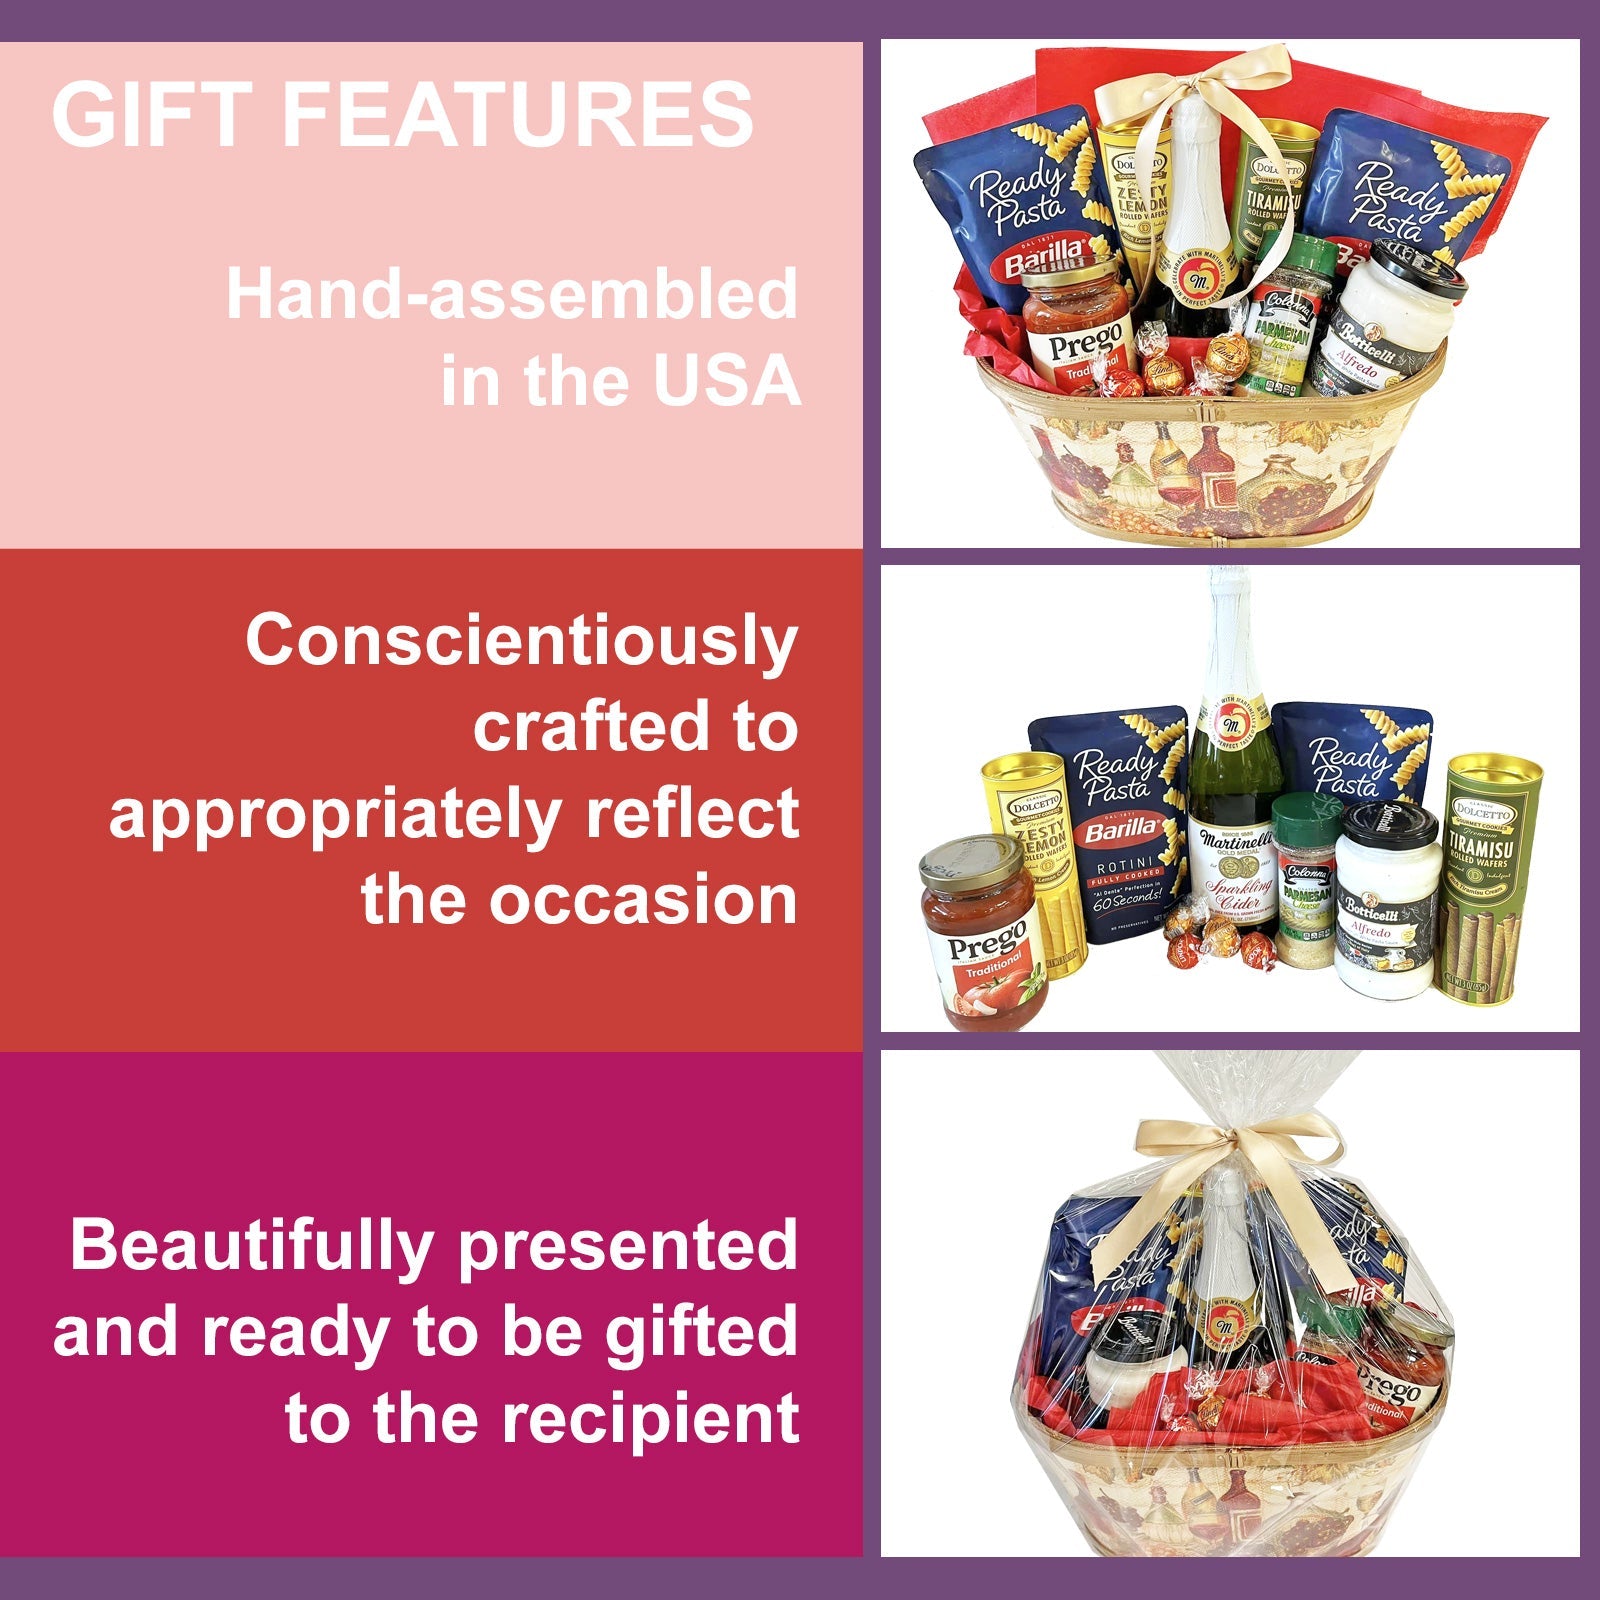 Dinner for Two Gift Basket with Pasta, Sauces, Dessert the Perfect Welcome Gift Basket